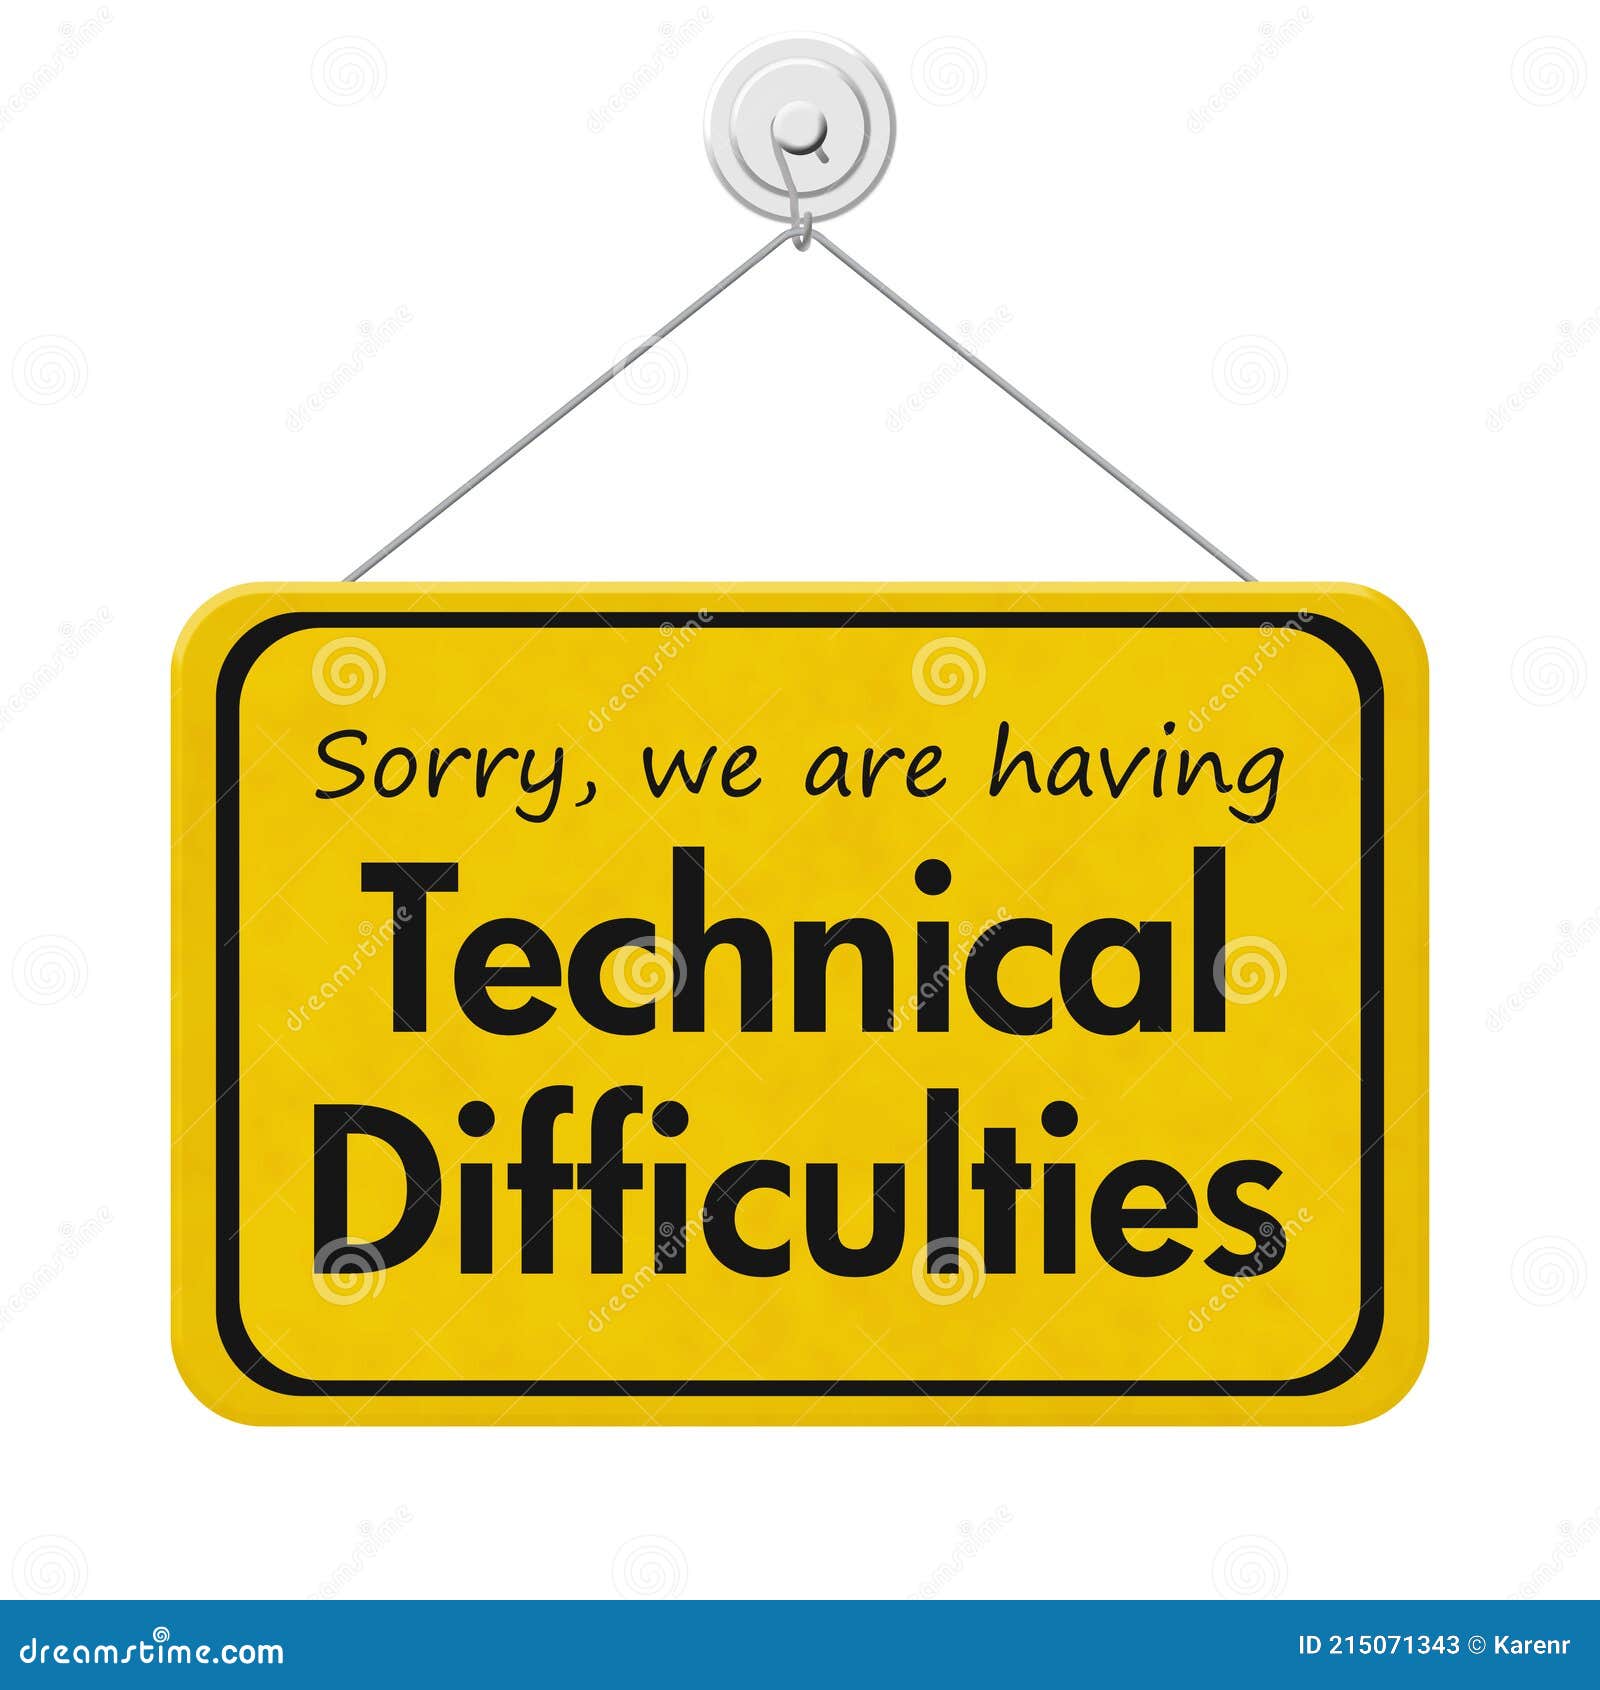 sorry-having-technical-difficulties-message-yellow-sign-message-isolated-white-technical-difficulties-message-215071343.jpg